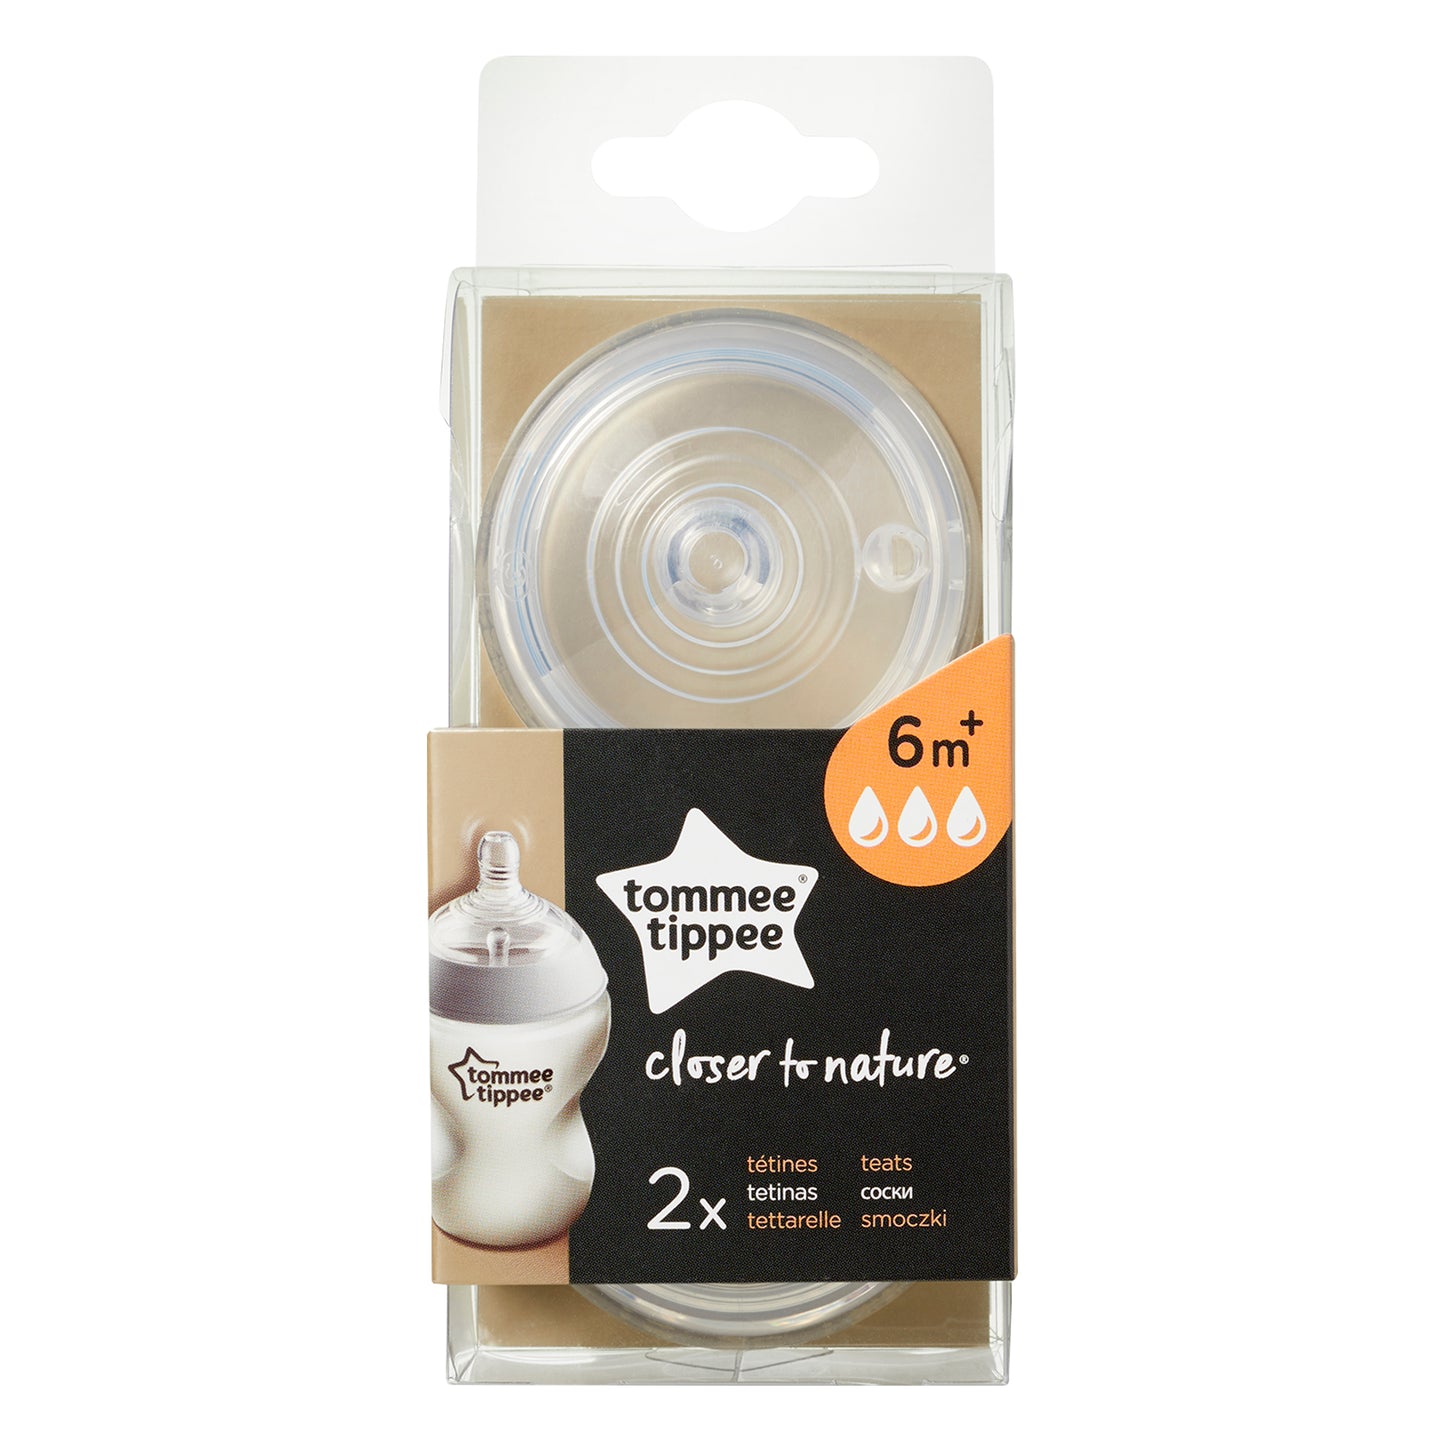 Tommee Tippee Closer To Nature Advanced Anti Colic Fast Flow Teats (6m+) Teats  x2